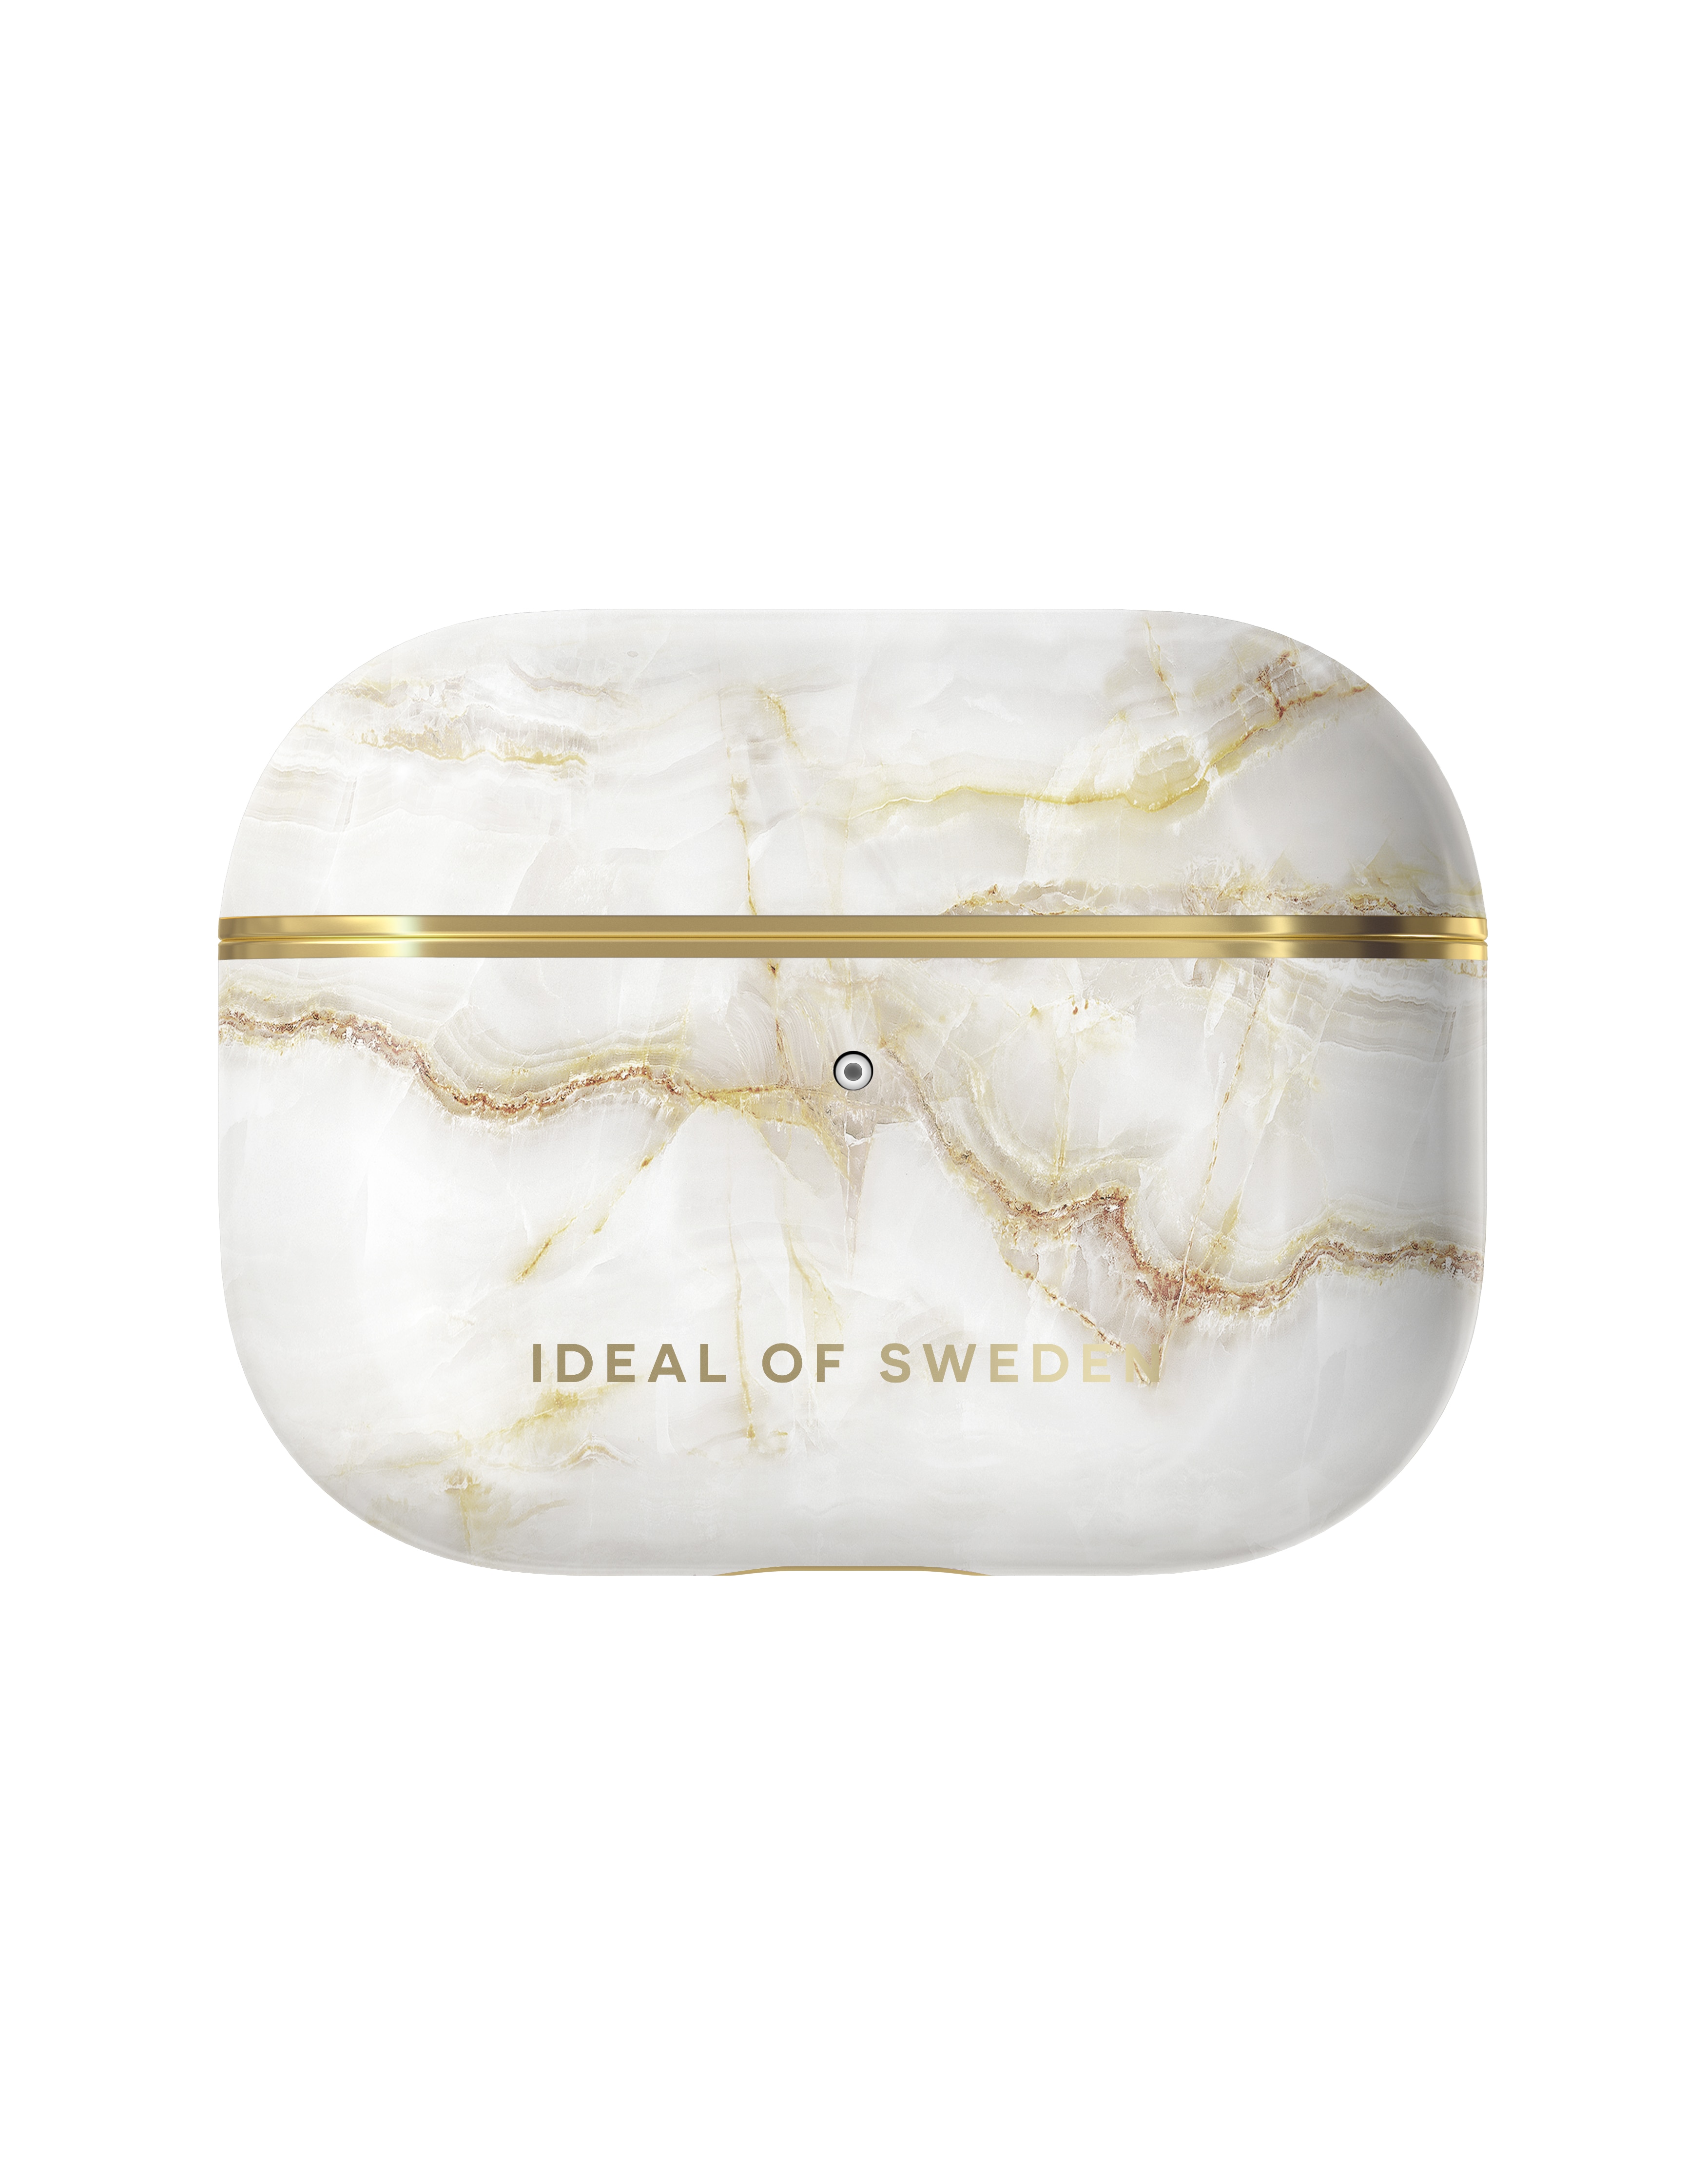 Fashion Case Apple AirPods Pro Golden Pearl Marble